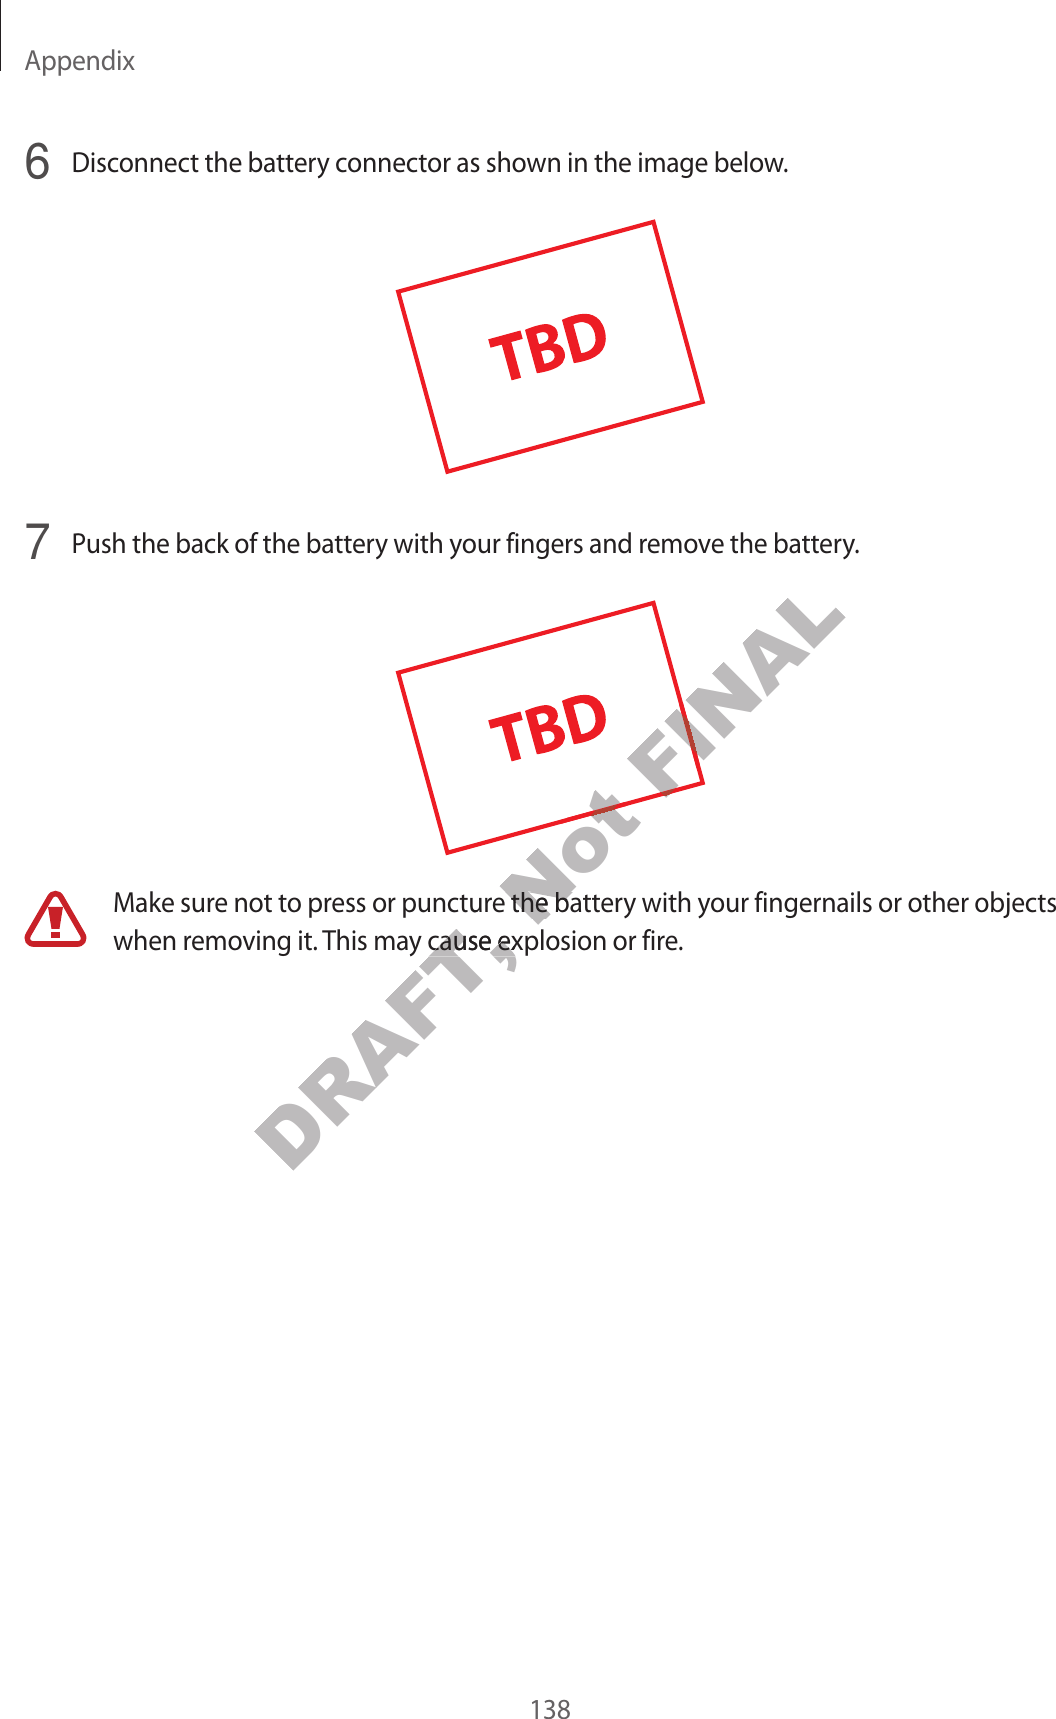 Appendix1386 Disconnect the battery connector as shown in the image below.7 Push the back of the ba ttery with your fingers and remov e the ba ttery.Make sure not to pr ess or puncture the battery with your fingernails or other objects when removing it . T his may cause e xplosion or fir e .DRAFT, Make sure not to pr ess or puncture the battery with your fingernails or other objects DRAFT, Make sure not to pr ess or puncture the battery with your fingernails or other objects when removing it . T his may cause e xplosion or fir e .DRAFT, when removing it . T his may cause e xplosion or fir e .Not Not Not Make sure not to pr ess or puncture the battery with your fingernails or other objects Not Make sure not to pr ess or puncture the battery with your fingernails or other objects FINALFINAL